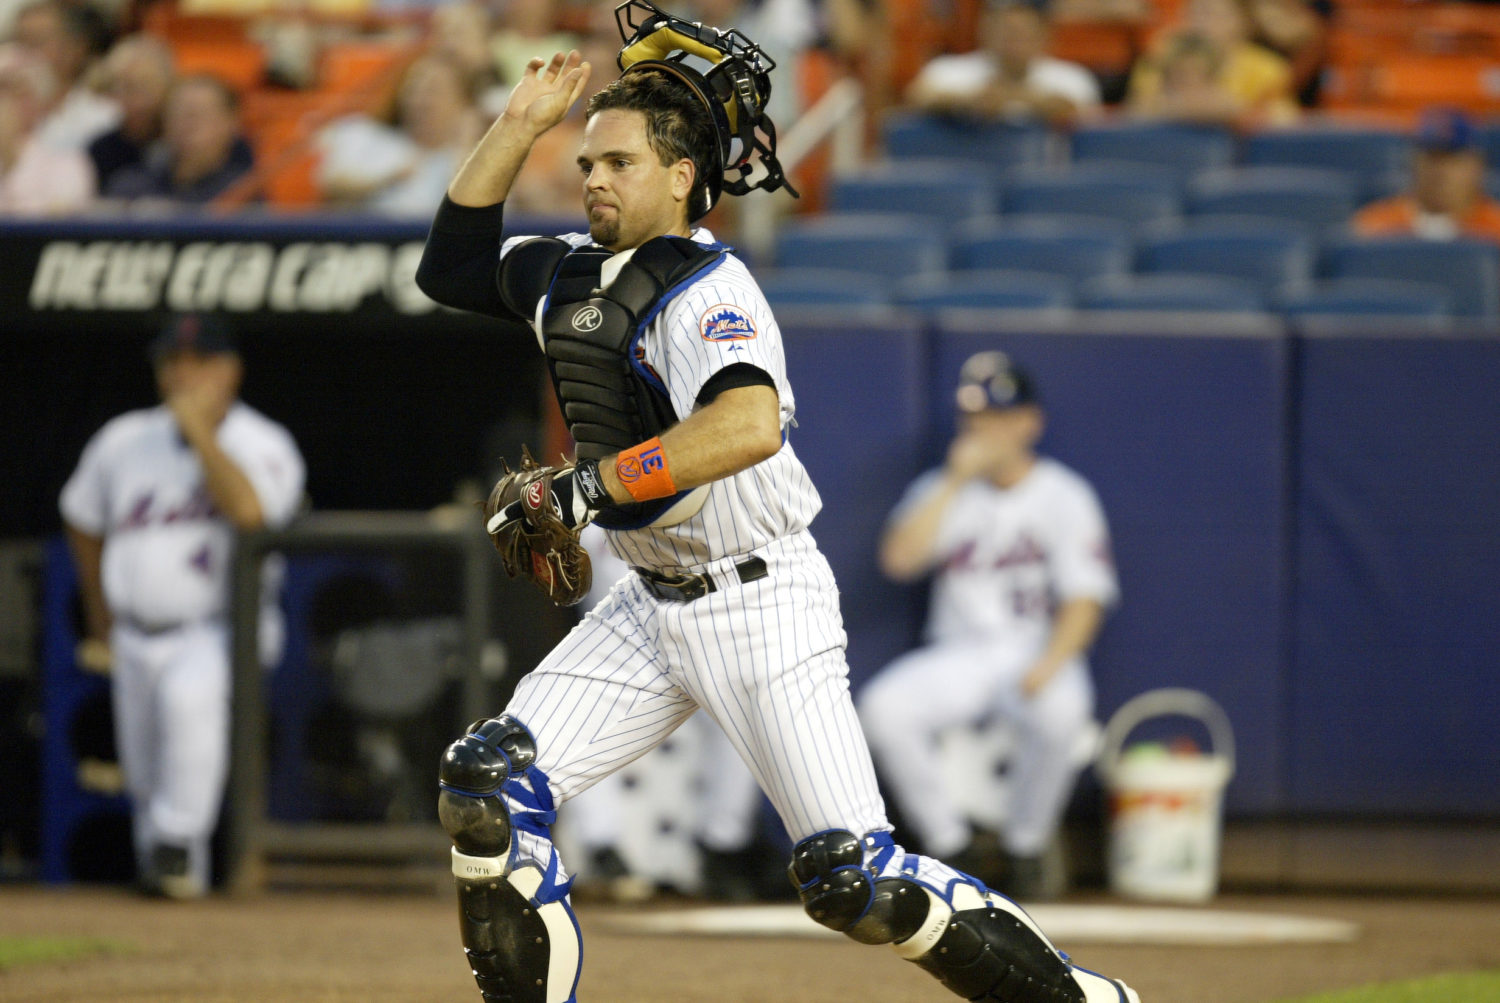 Mike Piazza Removes Mask to Field a Ball